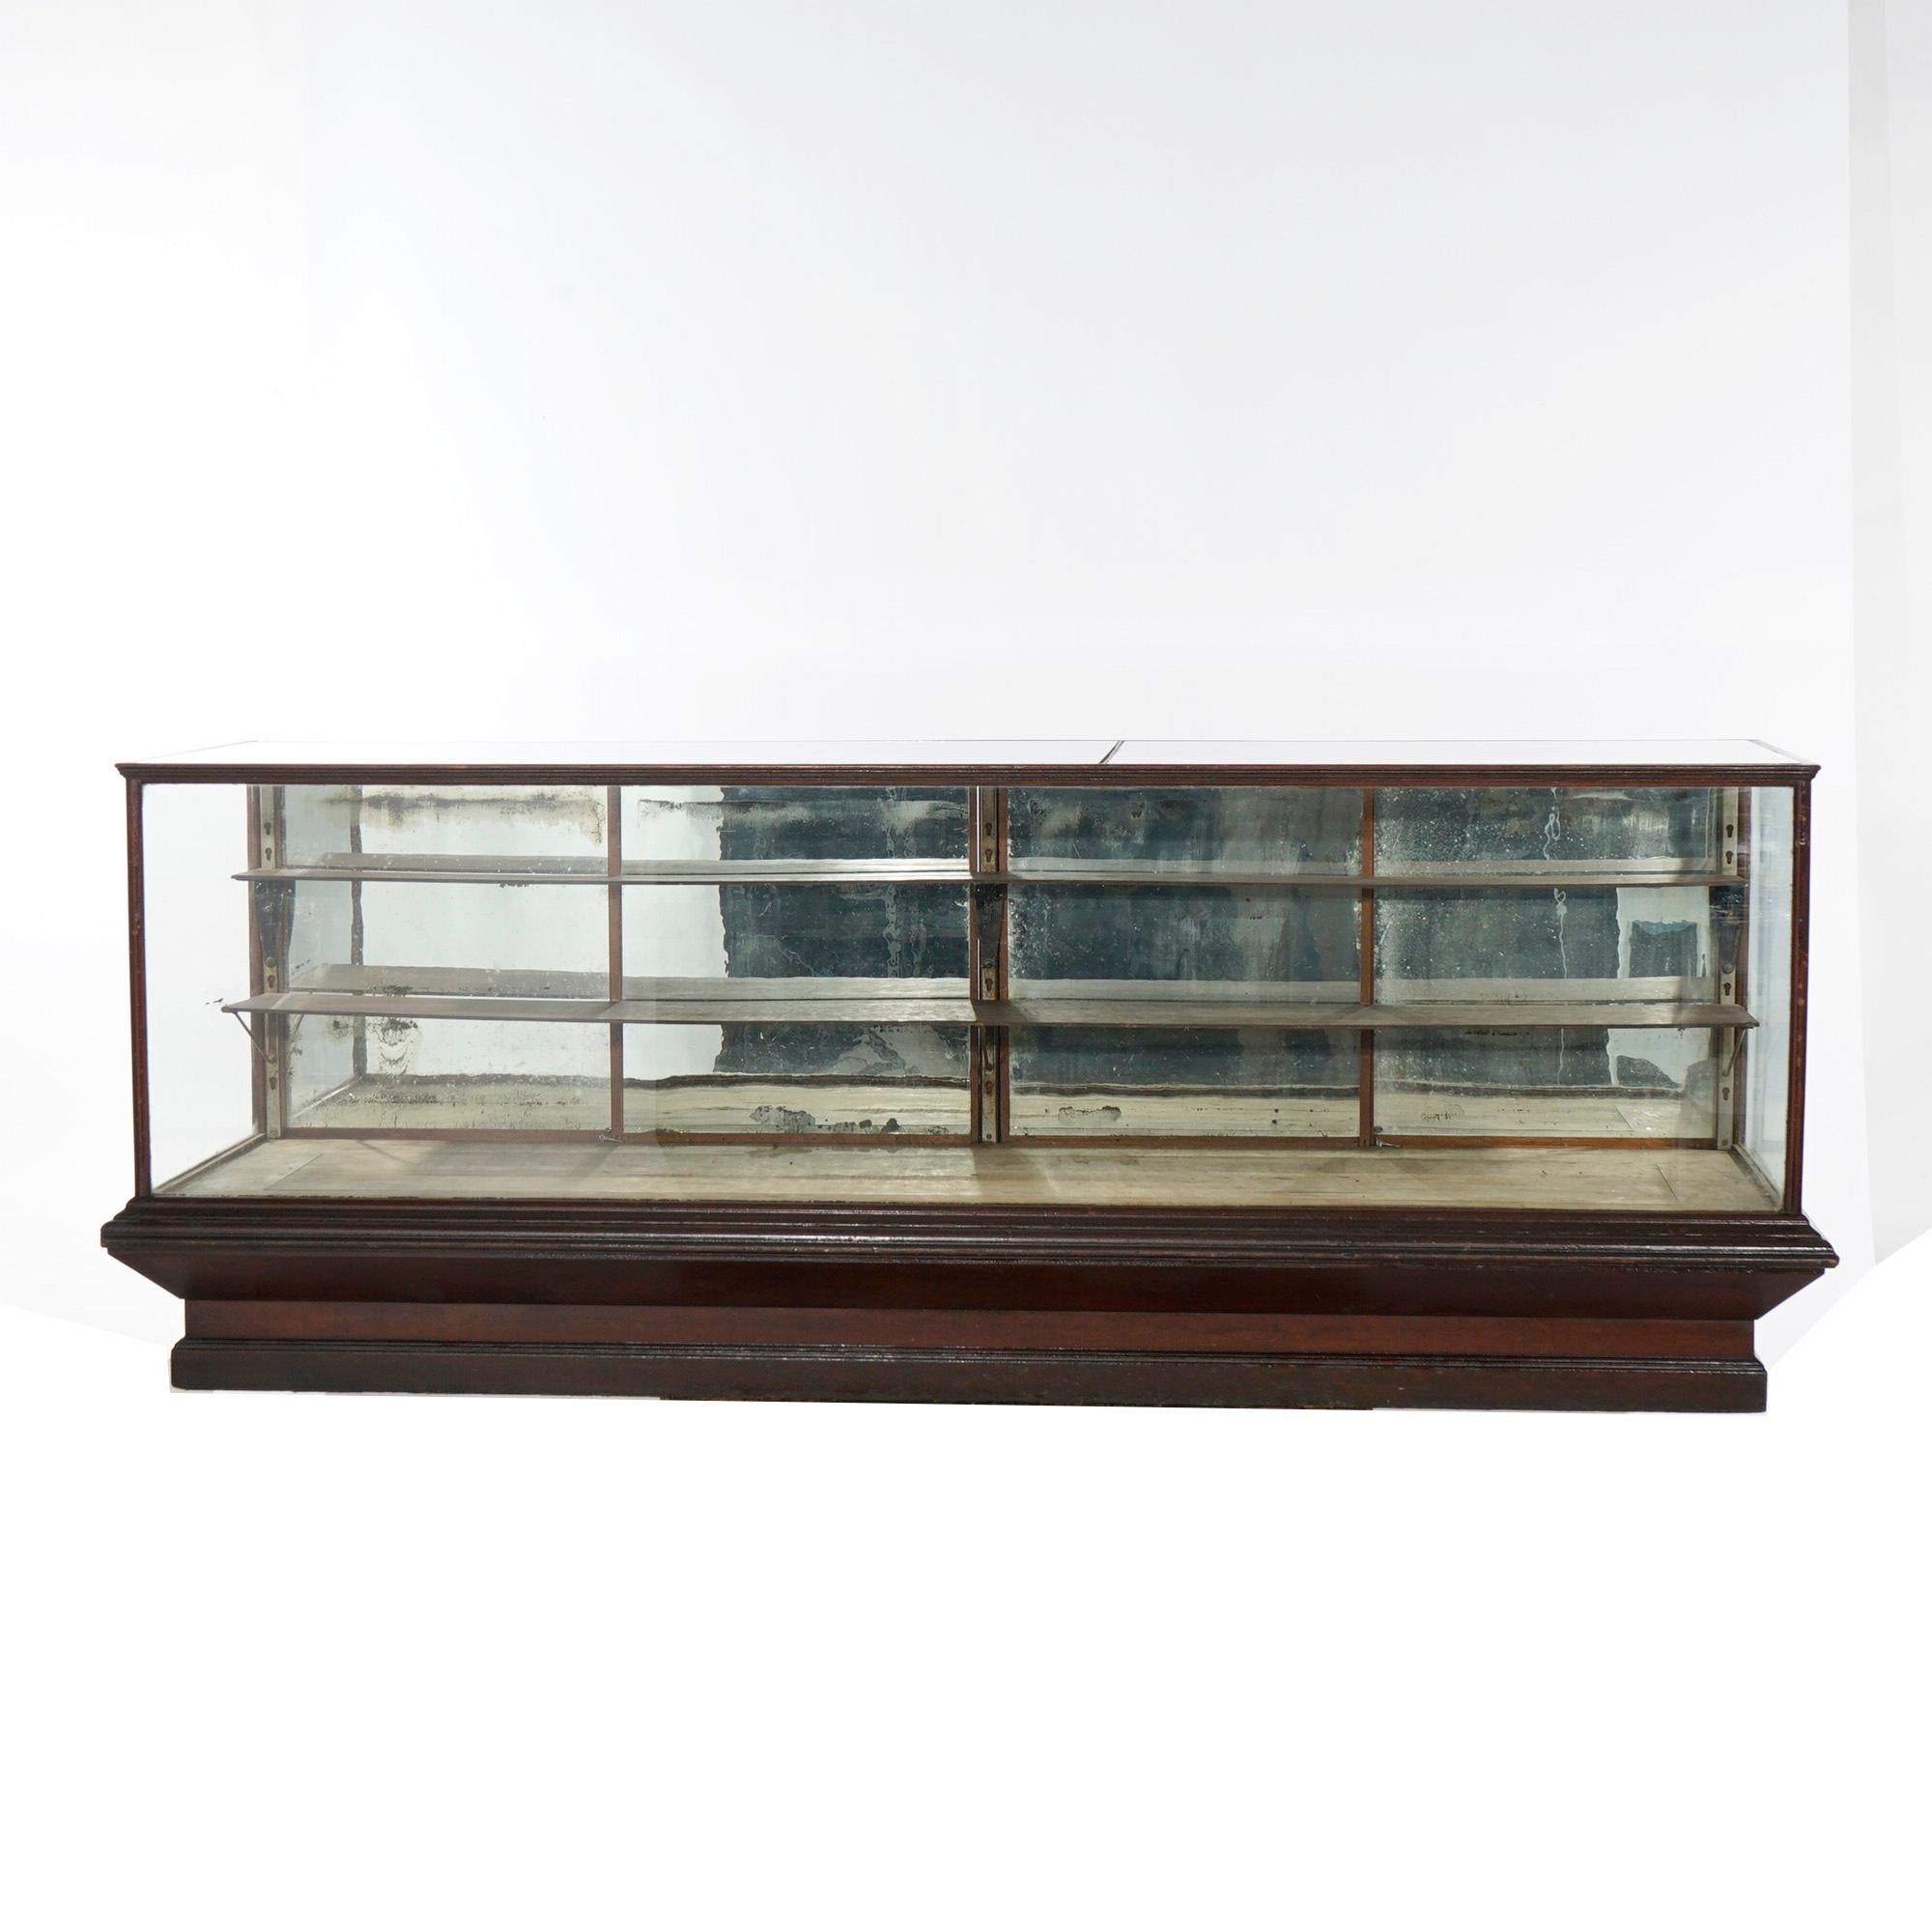 An antique country store counter display case offers oak construction with sliding mirrored glass doors opening to shelved interior and lower drawers, c1900.

Measures- 36''H x 96.5''W x 31.5''D.

*Ask about DISCOUNTED DELIVERY rates within 1,500